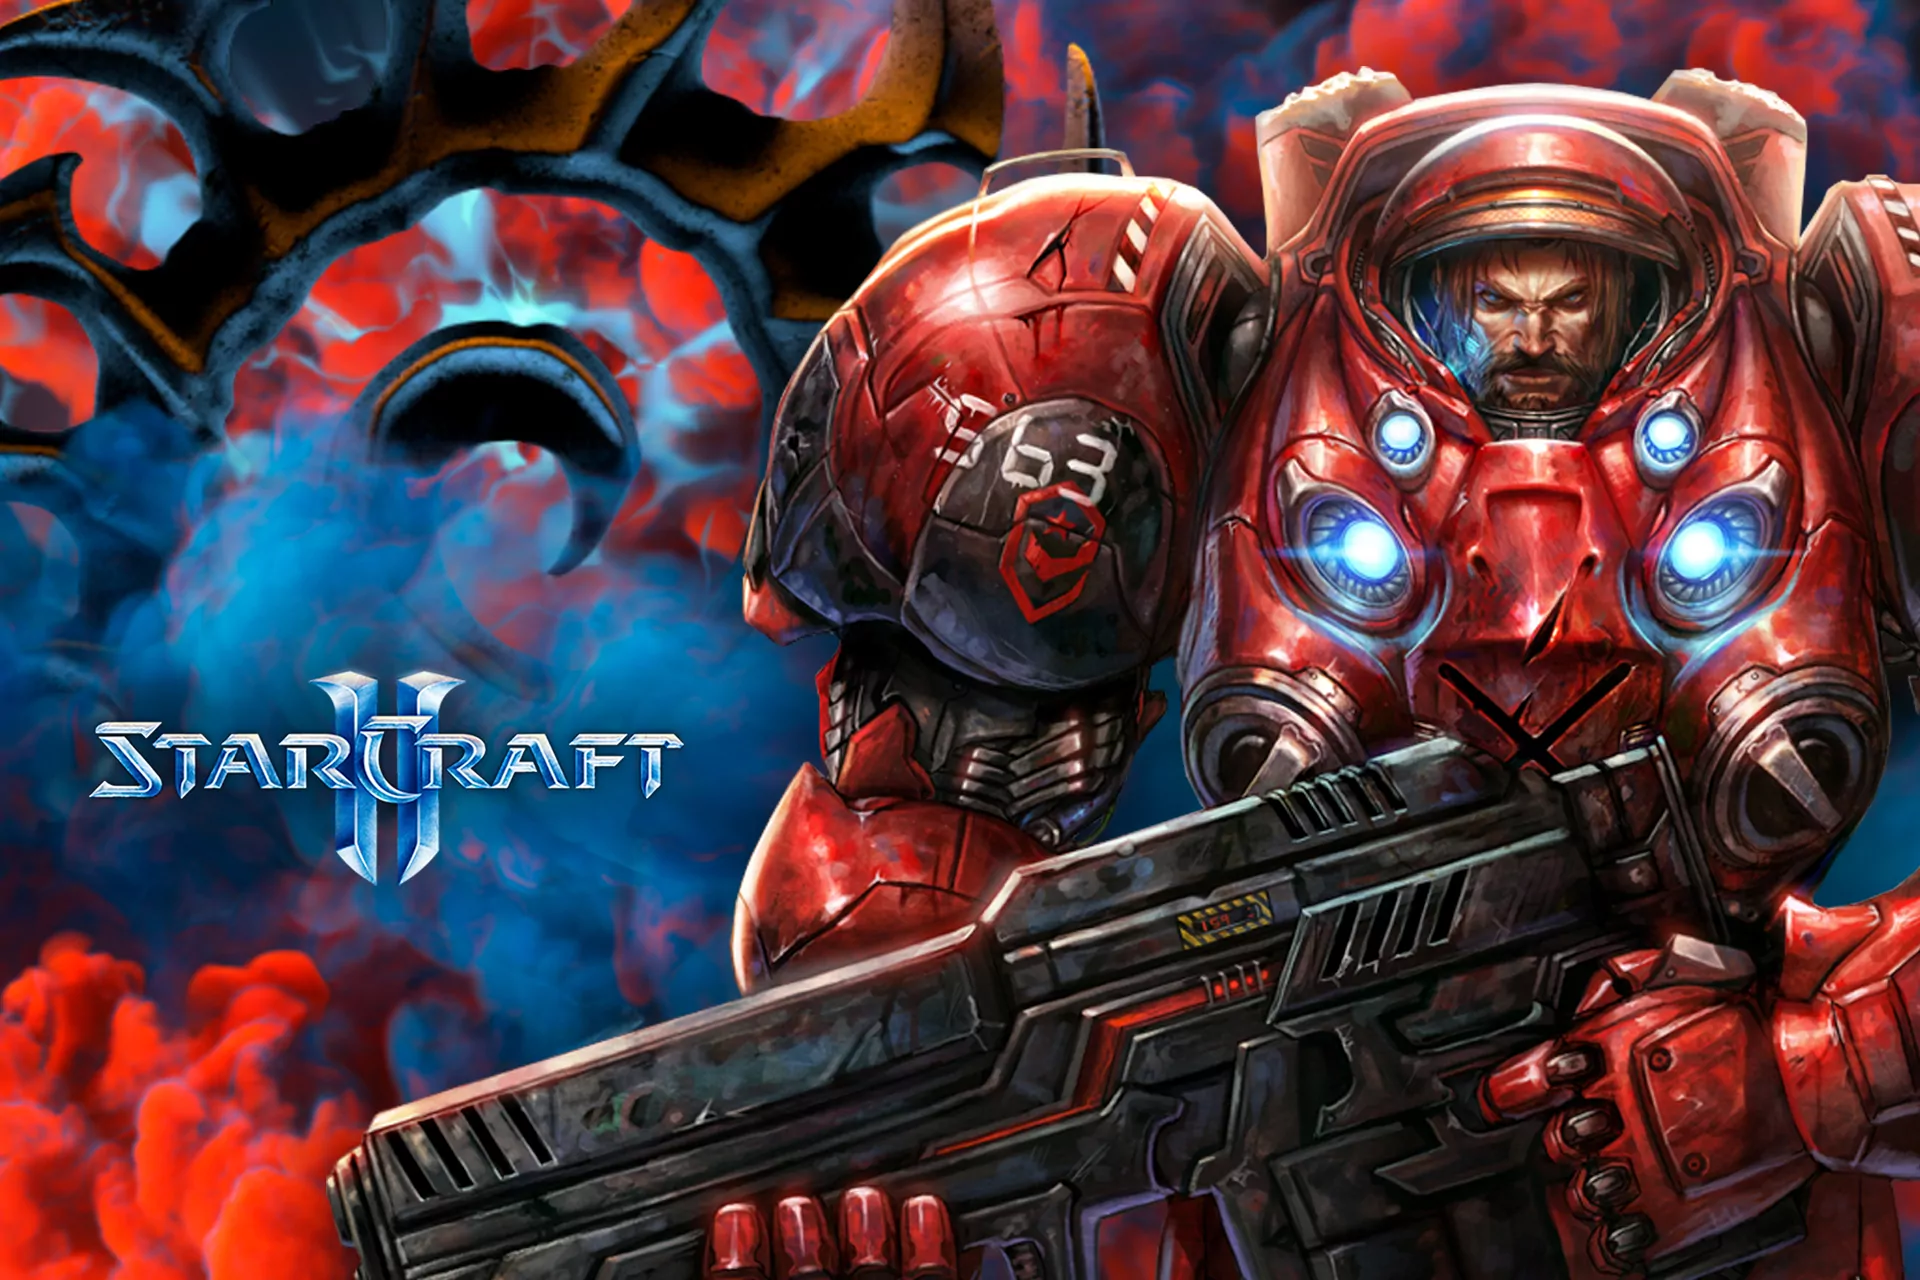 Starcraft is a pretty popular online game made with a science-fiction theme.